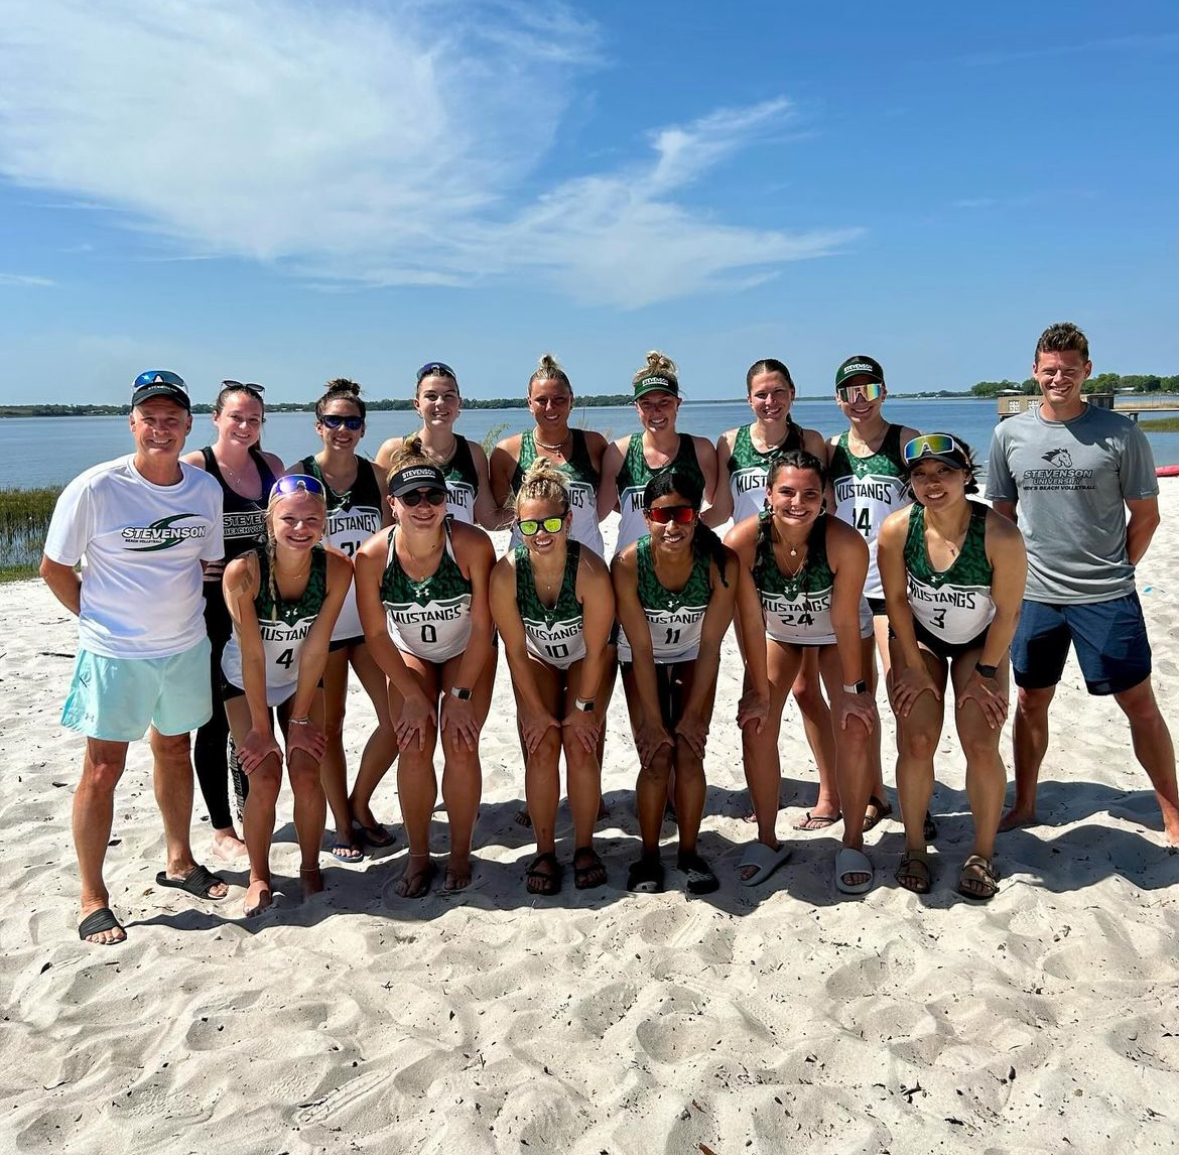 The Womens Beach Volleyball team in Florida last weekend. Photo courtesy of Stevenson_wvb on Instagram.